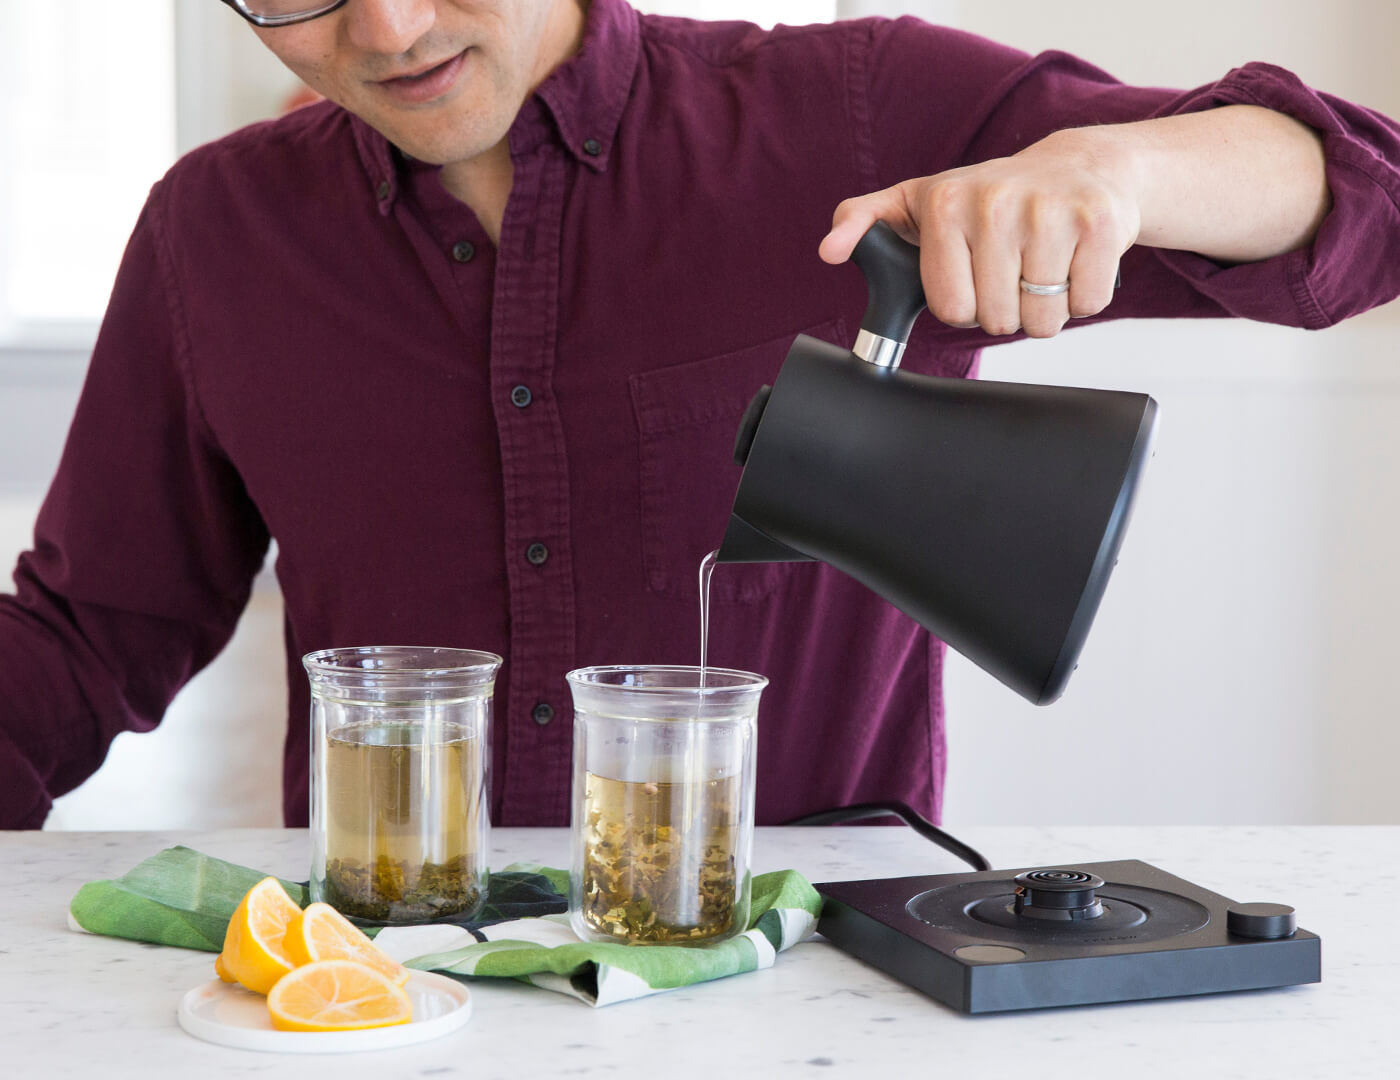 Pouring hot water into tea glasses from the Black Corvo Kettle EKG